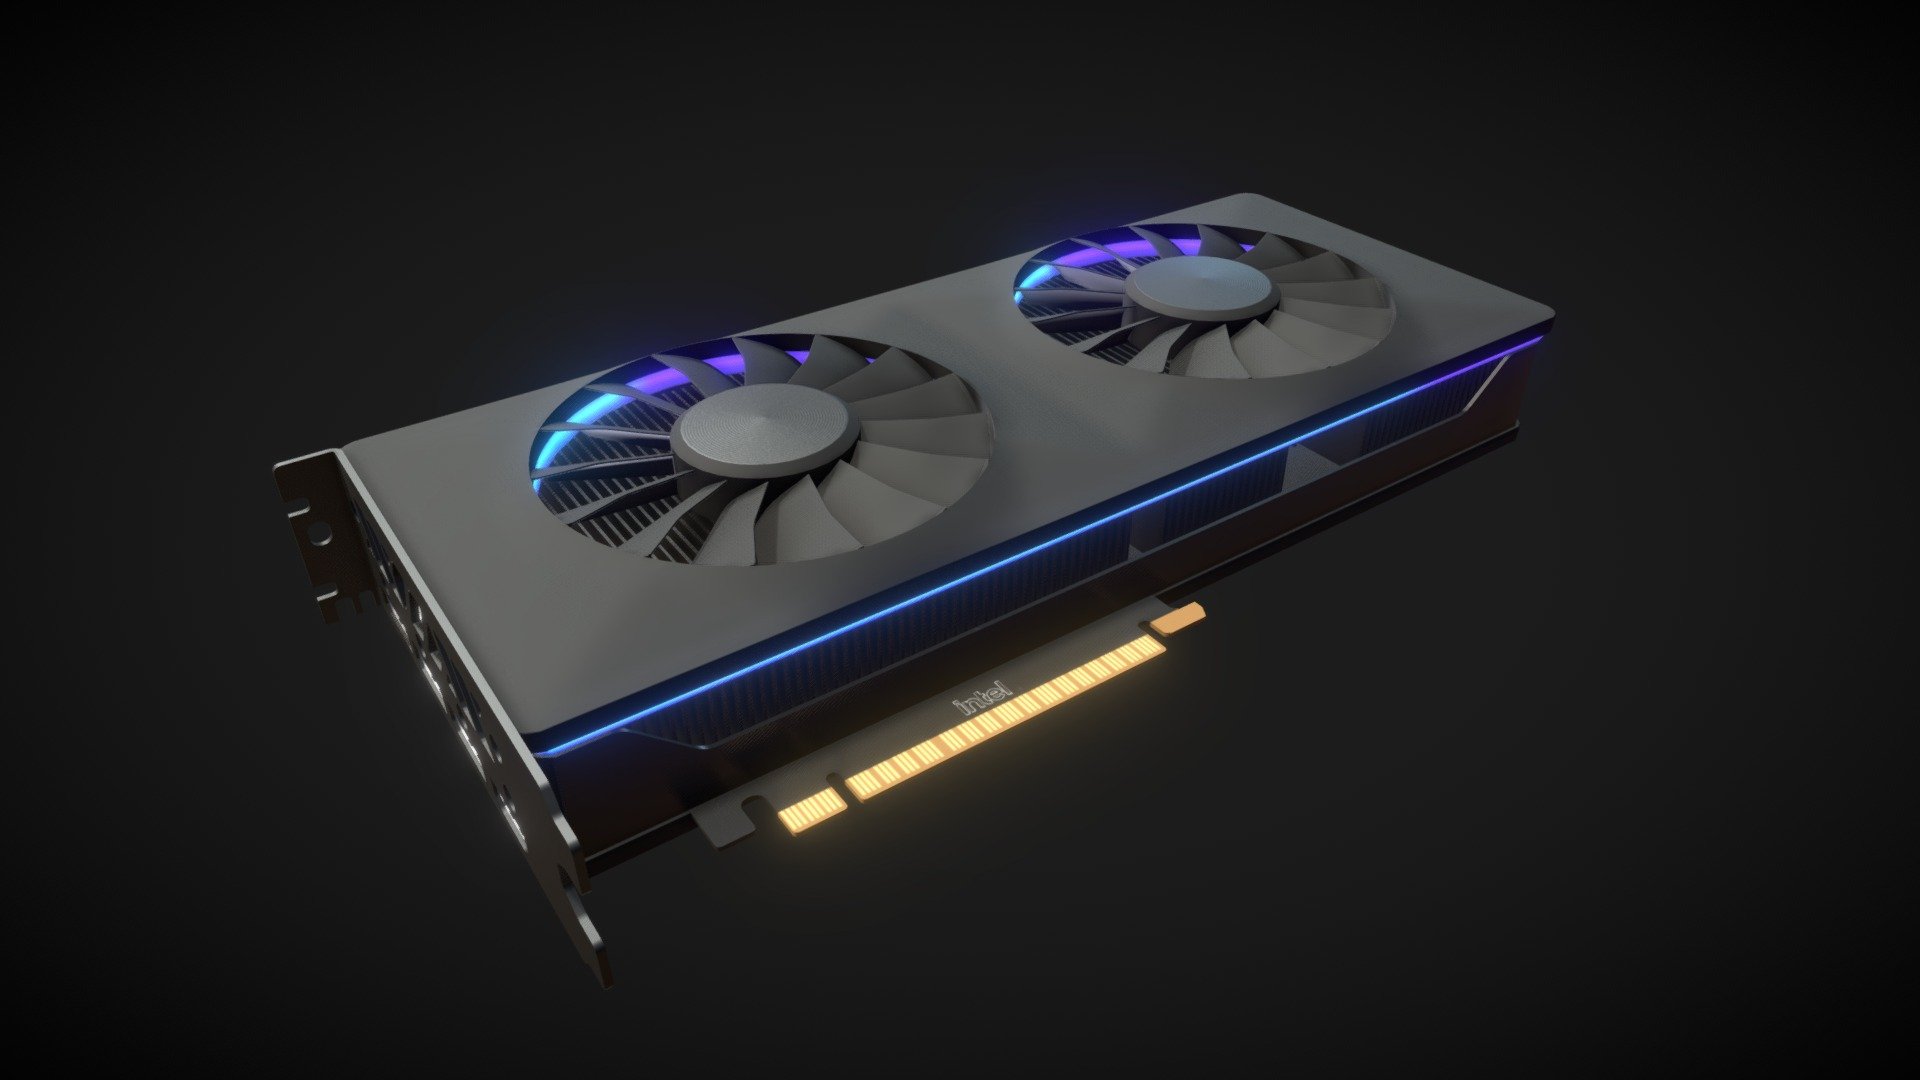 3D model of Intel's new reference desktop graphic card Arc A770.

Model was made, before the card's public avaliability from reference images and videos found on internet, so proportions might not perfectly match the actual product 3d model